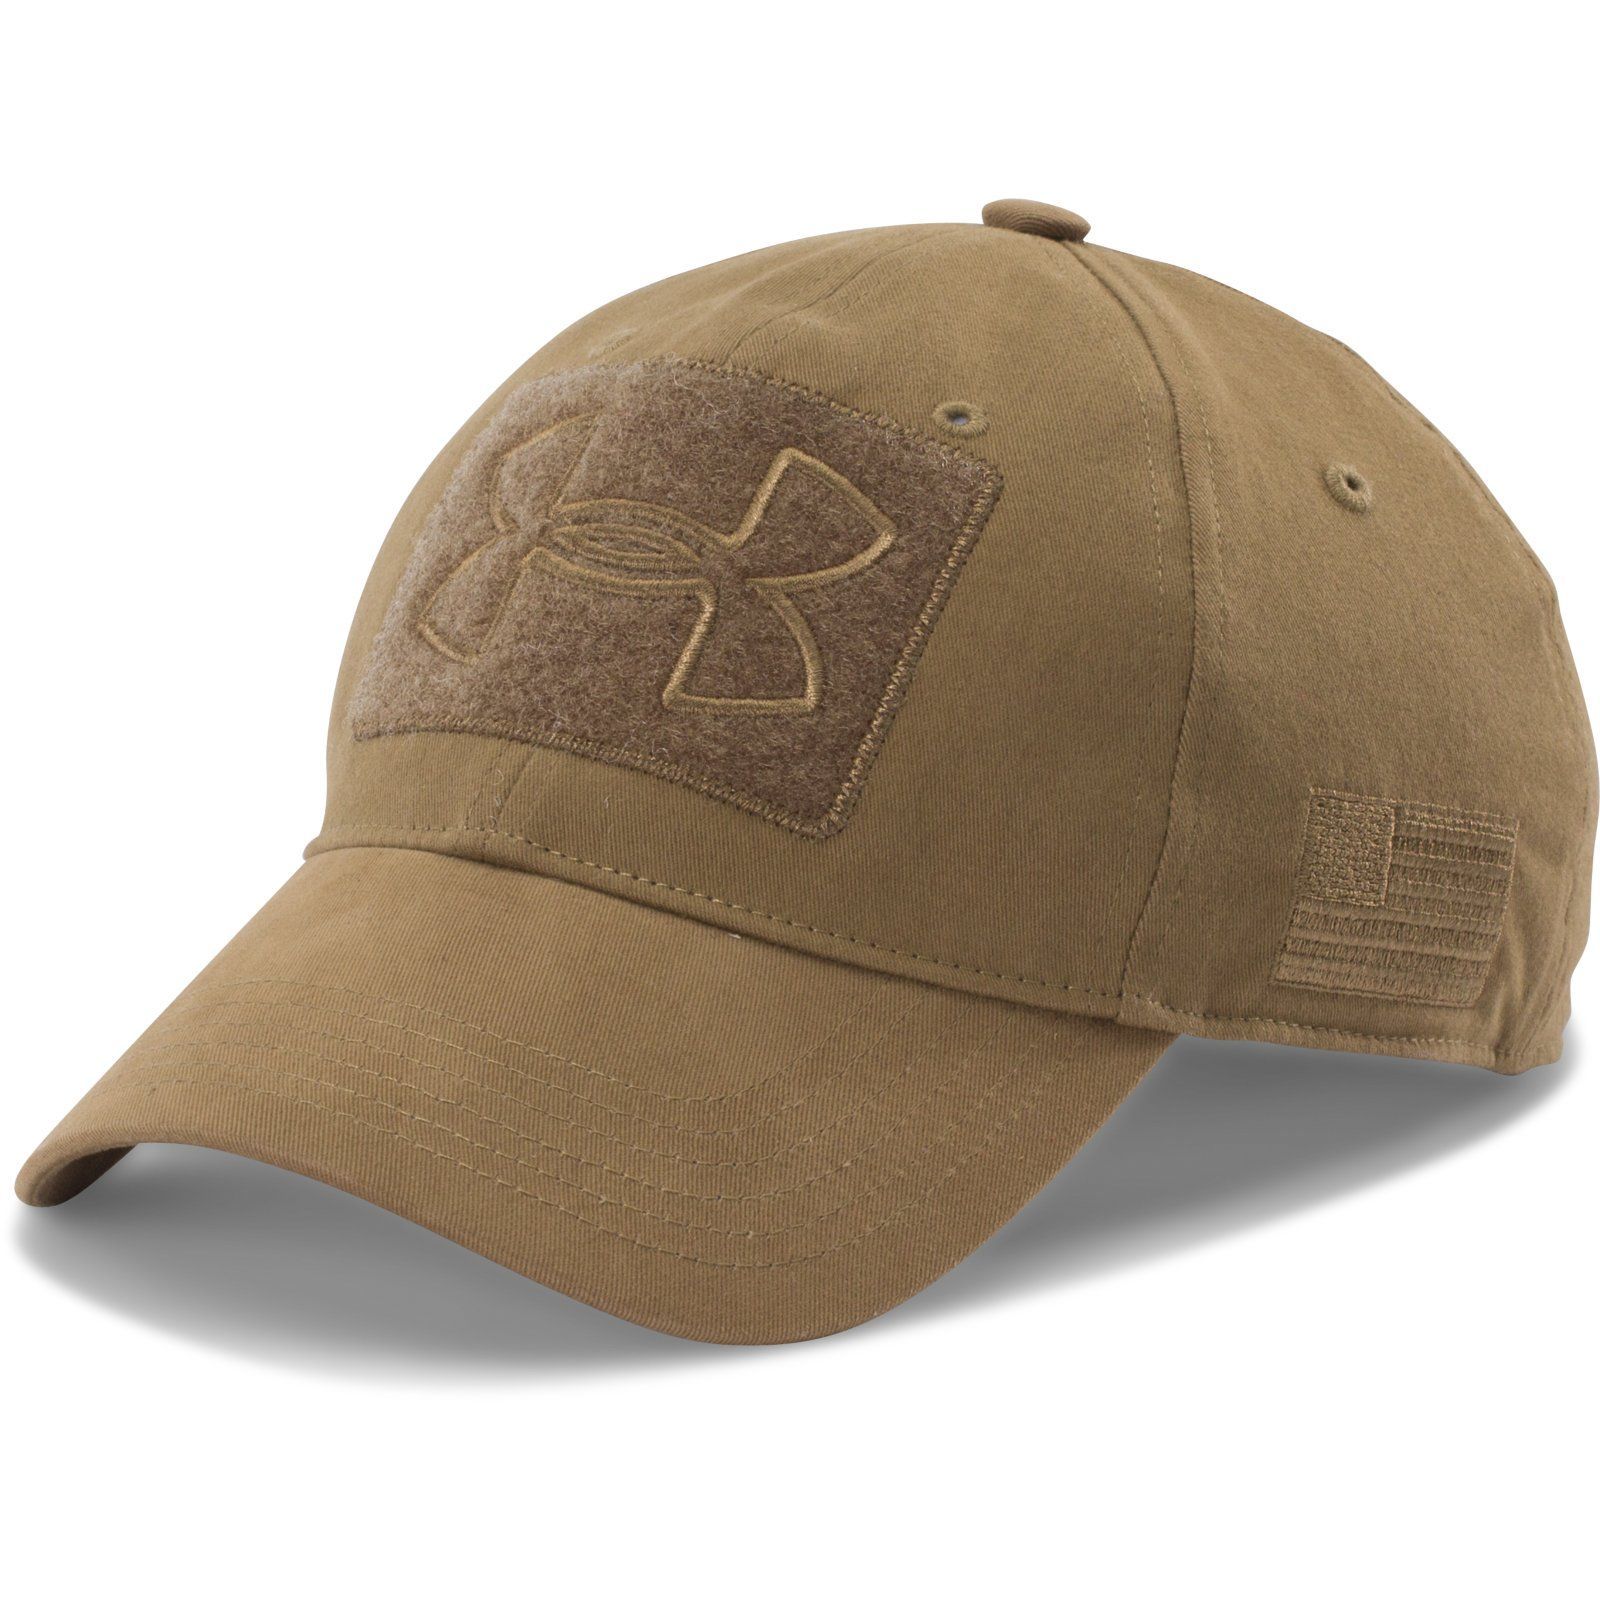 Under Armour Tactical Patch Hat Law 